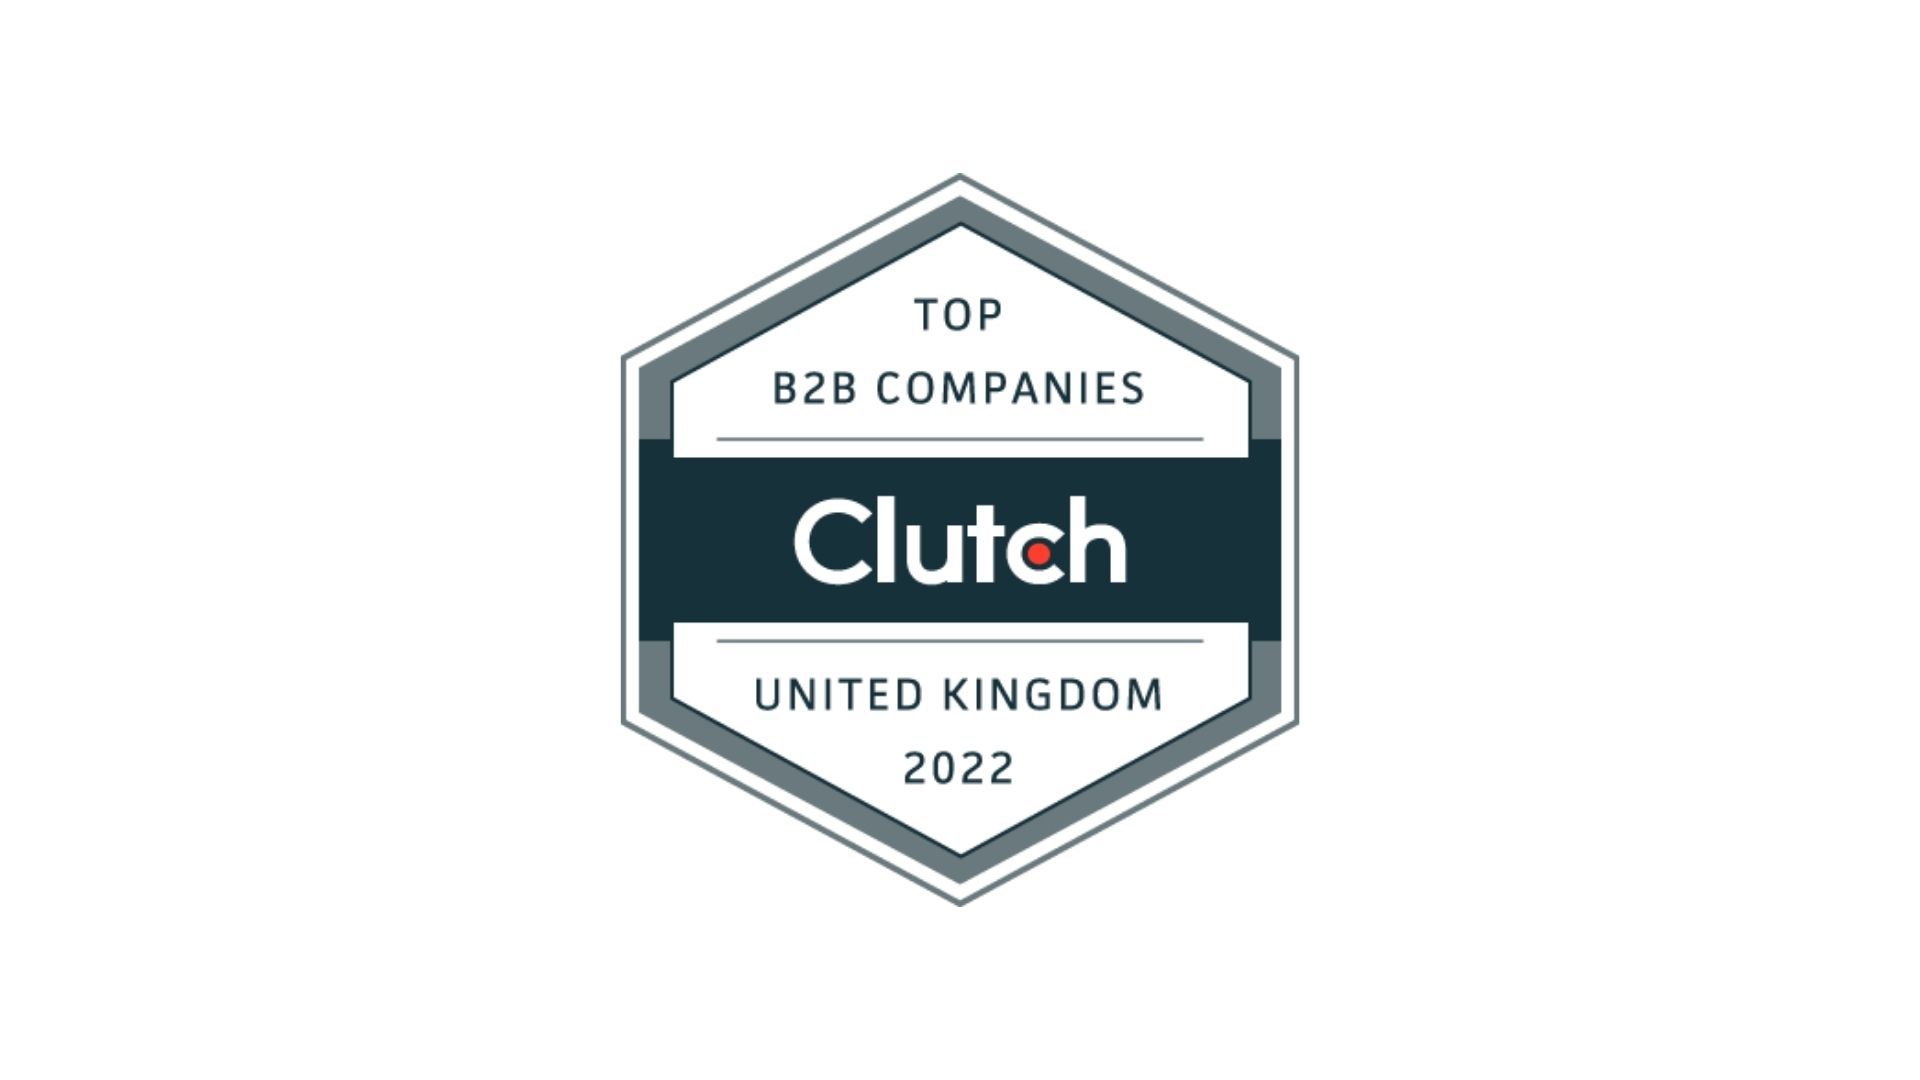 We are among the Top B2B Companies in the UK!